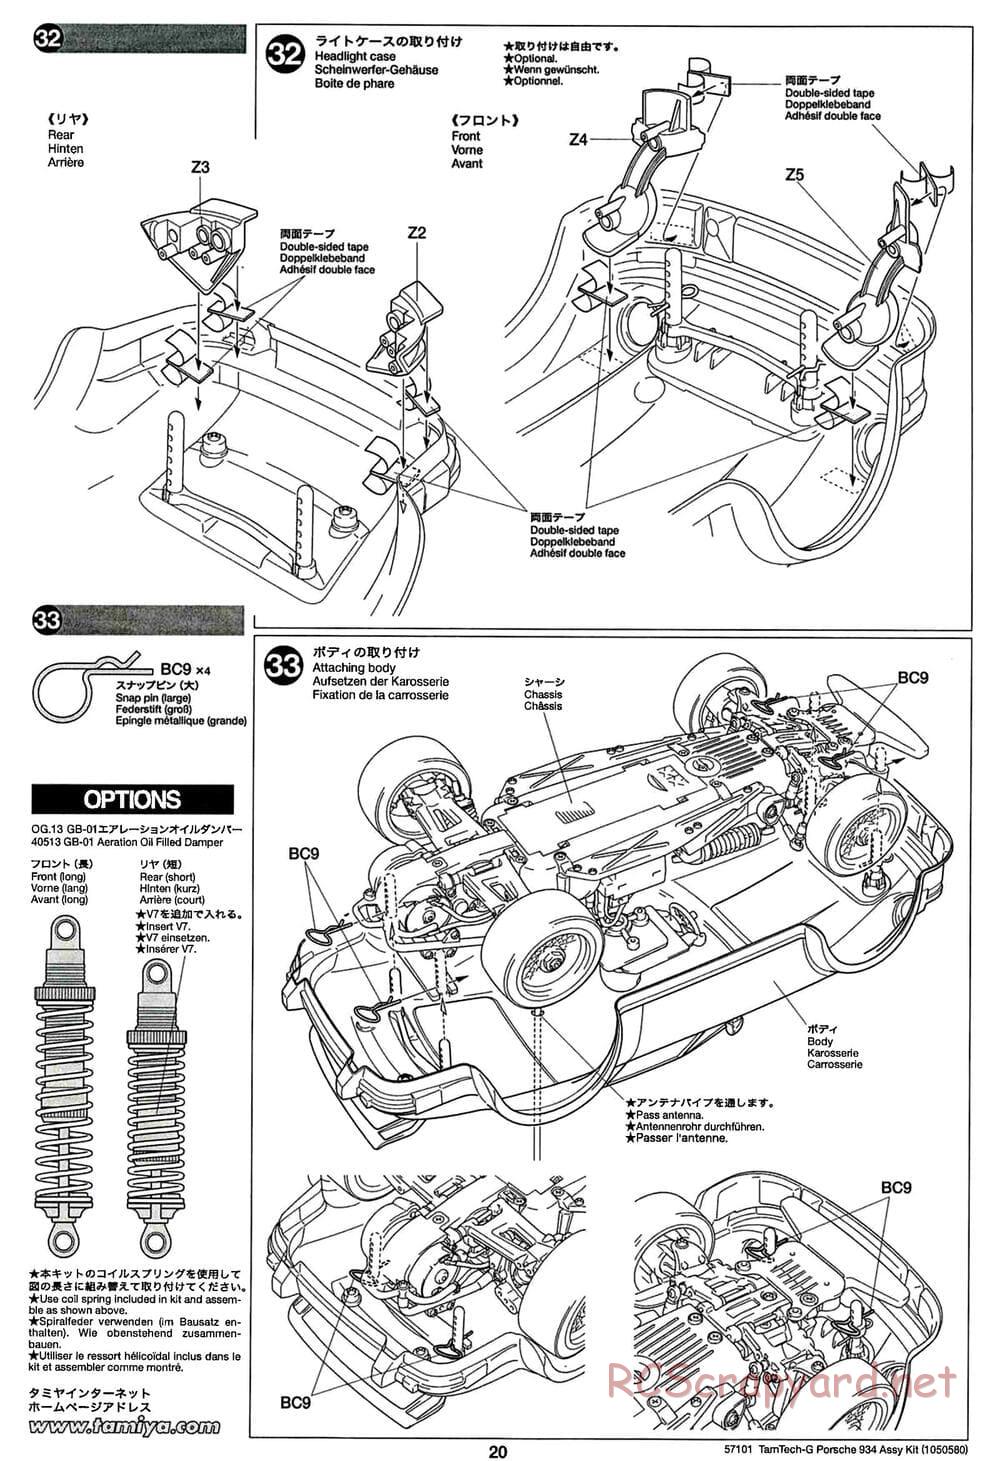 Tamiya - Porsche Turbo RSR - GT-01 Chassis - Manual - Page 20